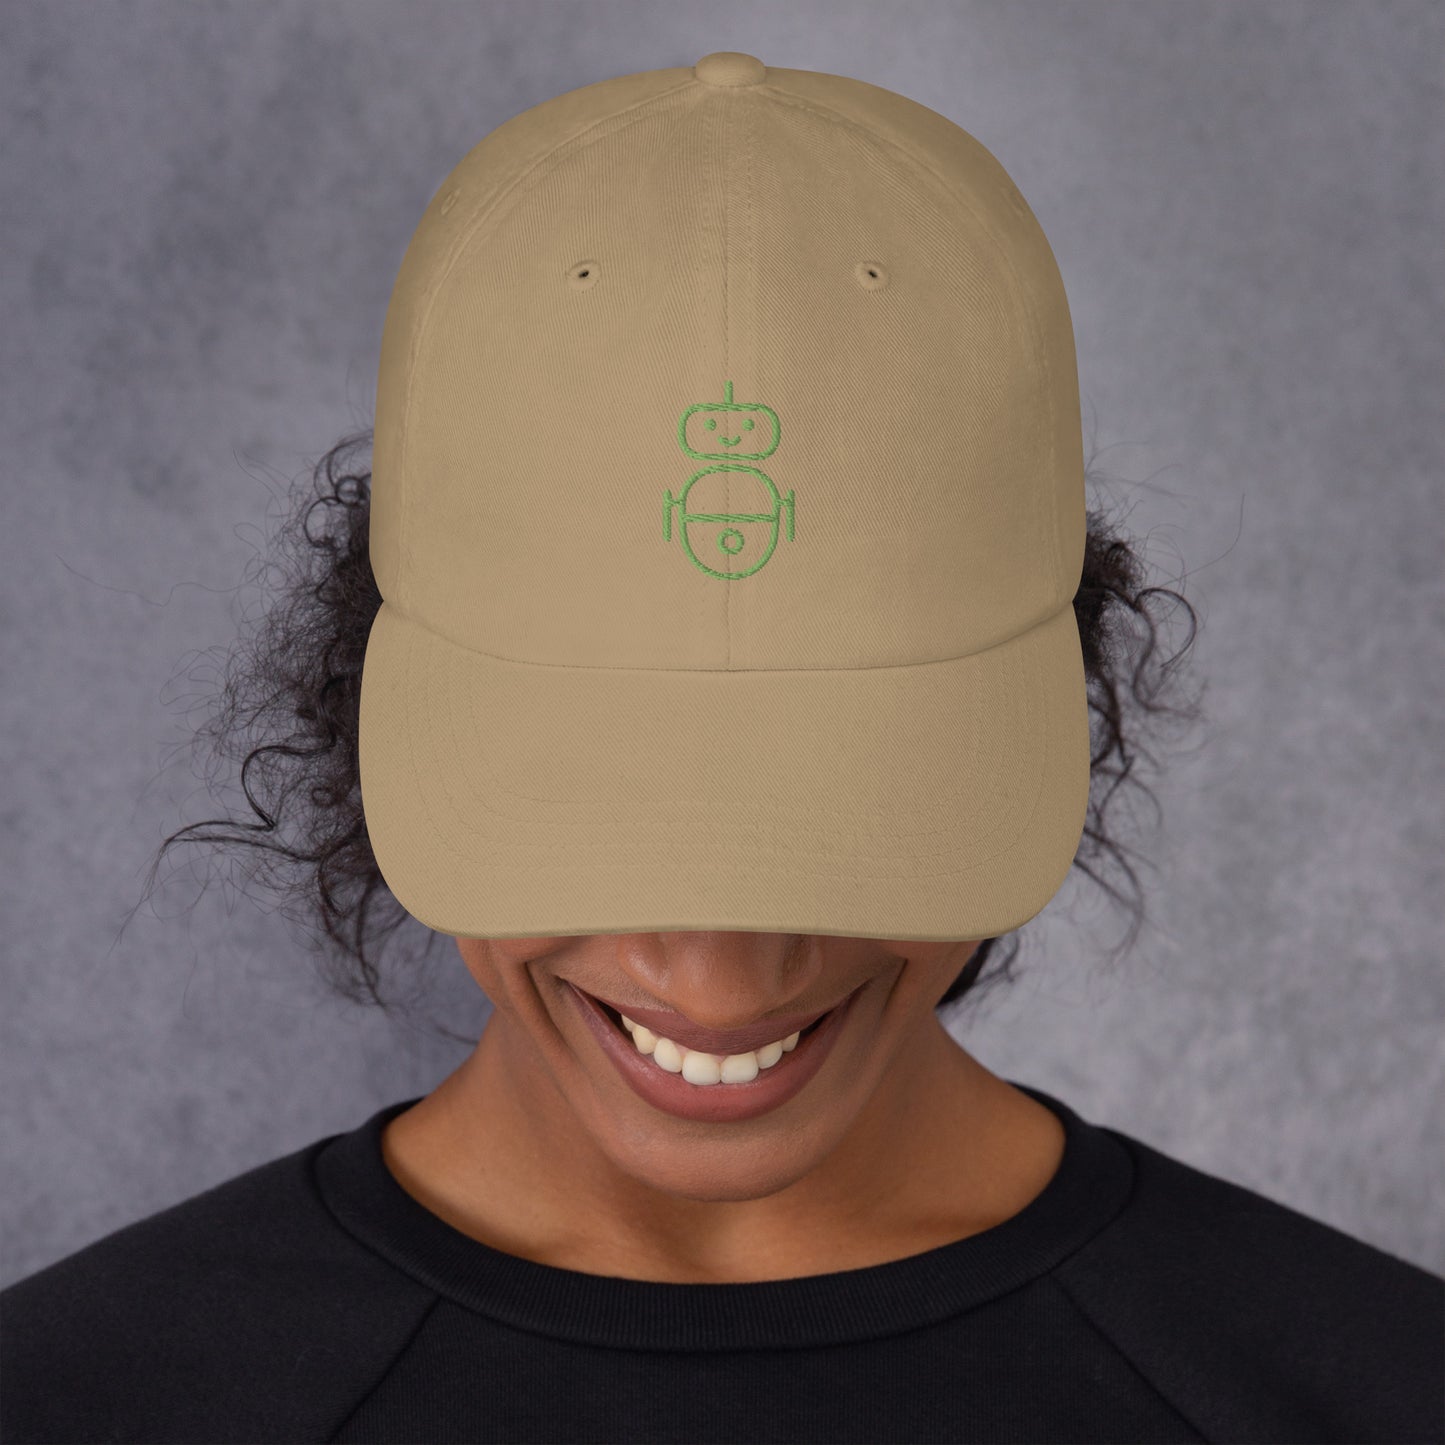 Women with khaki hat with in green Android logo